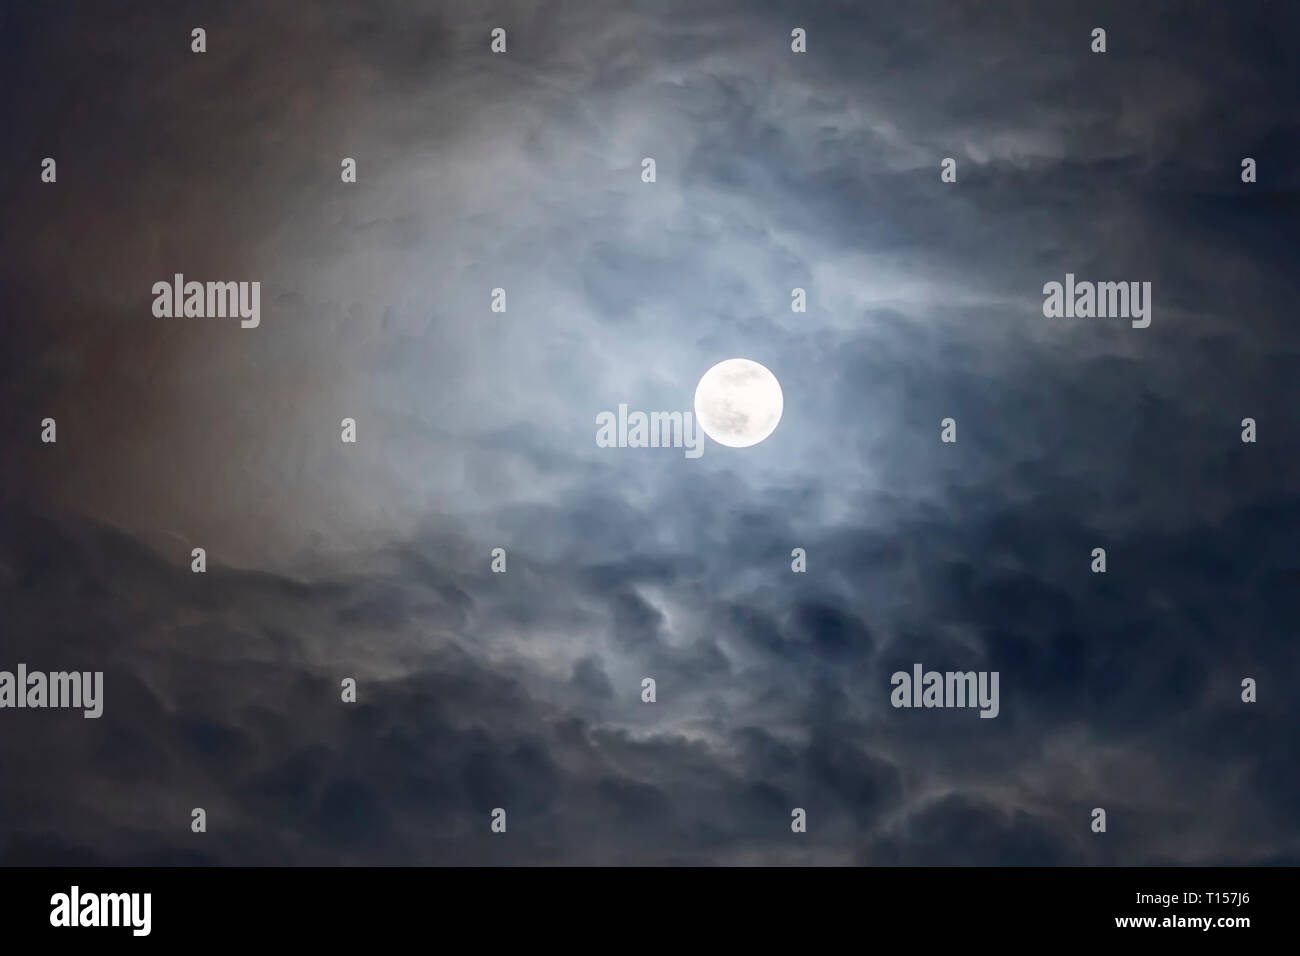 Full Moon With Clouds At Night Dramatic Clouds In The Moonlight Stock Photo Alamy